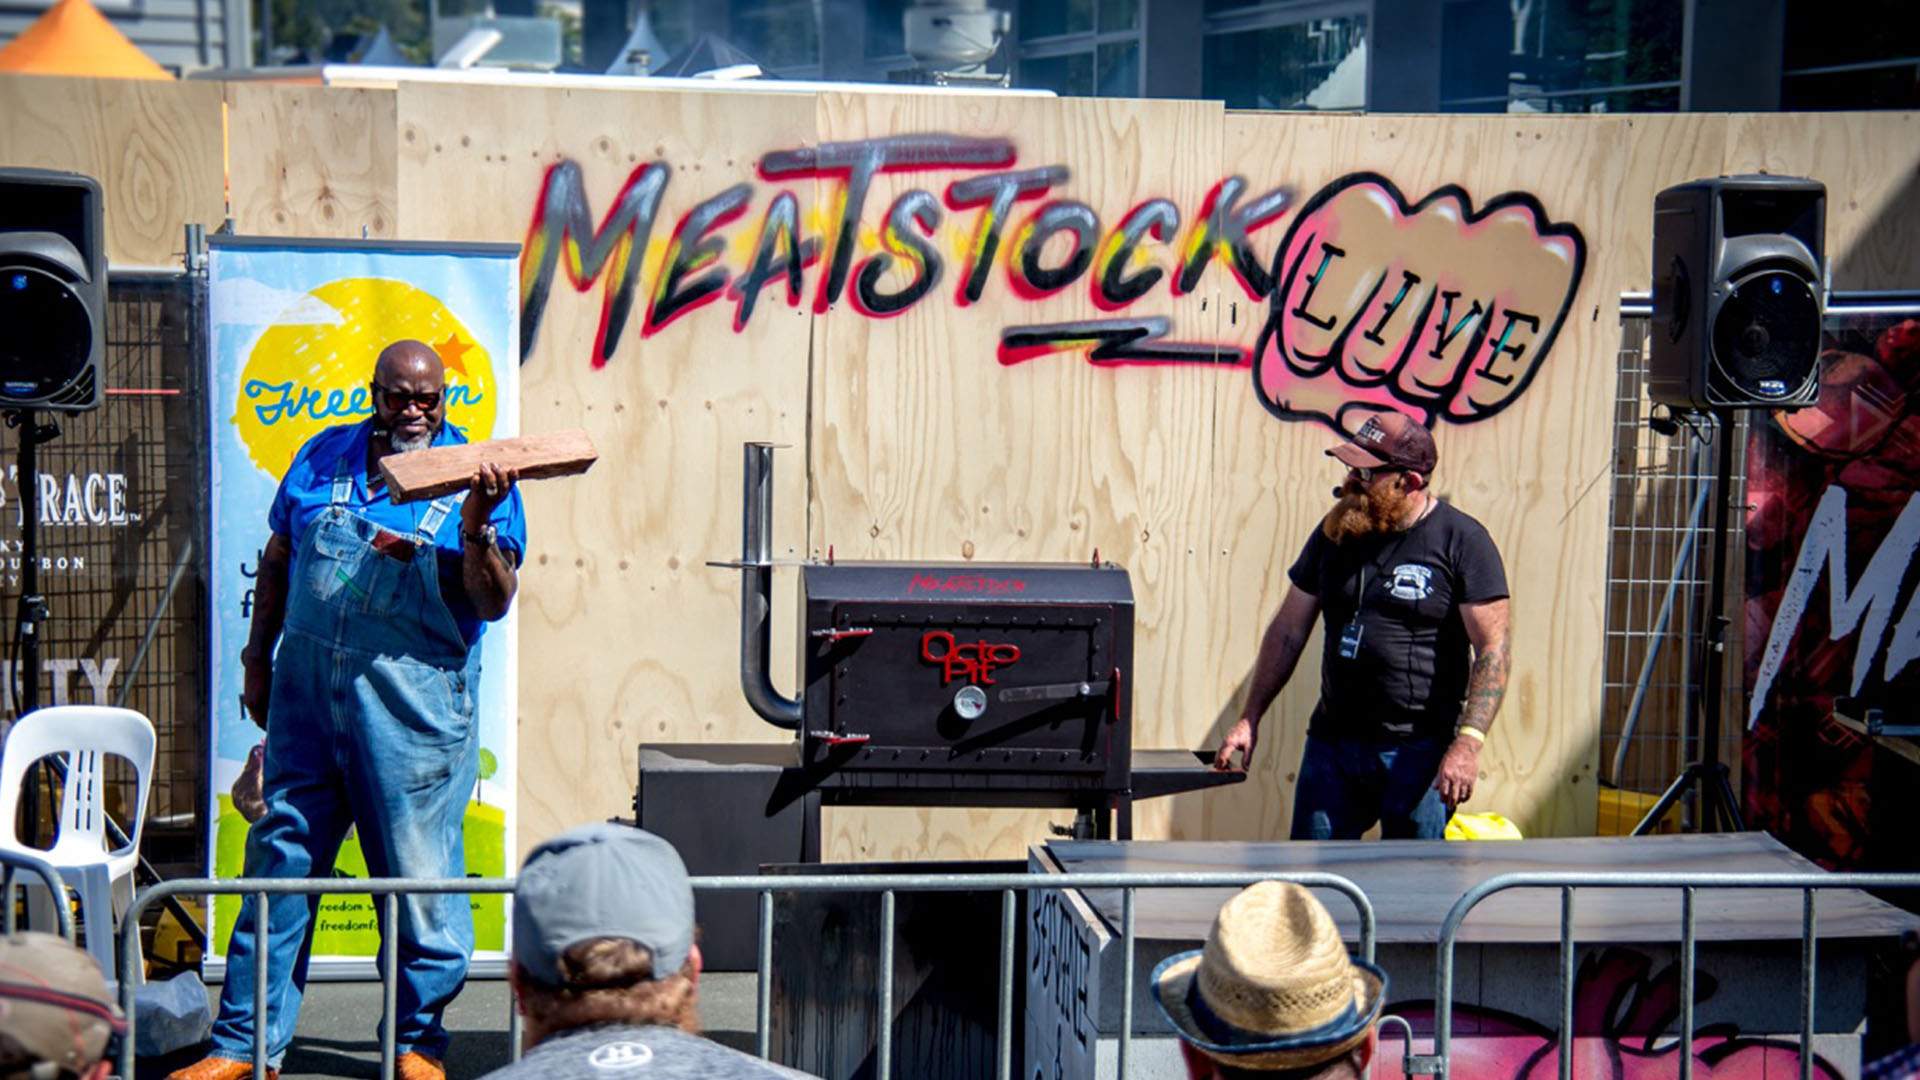 Two-Day Meat Festival Meatstock Is Coming Back for Its Second Year